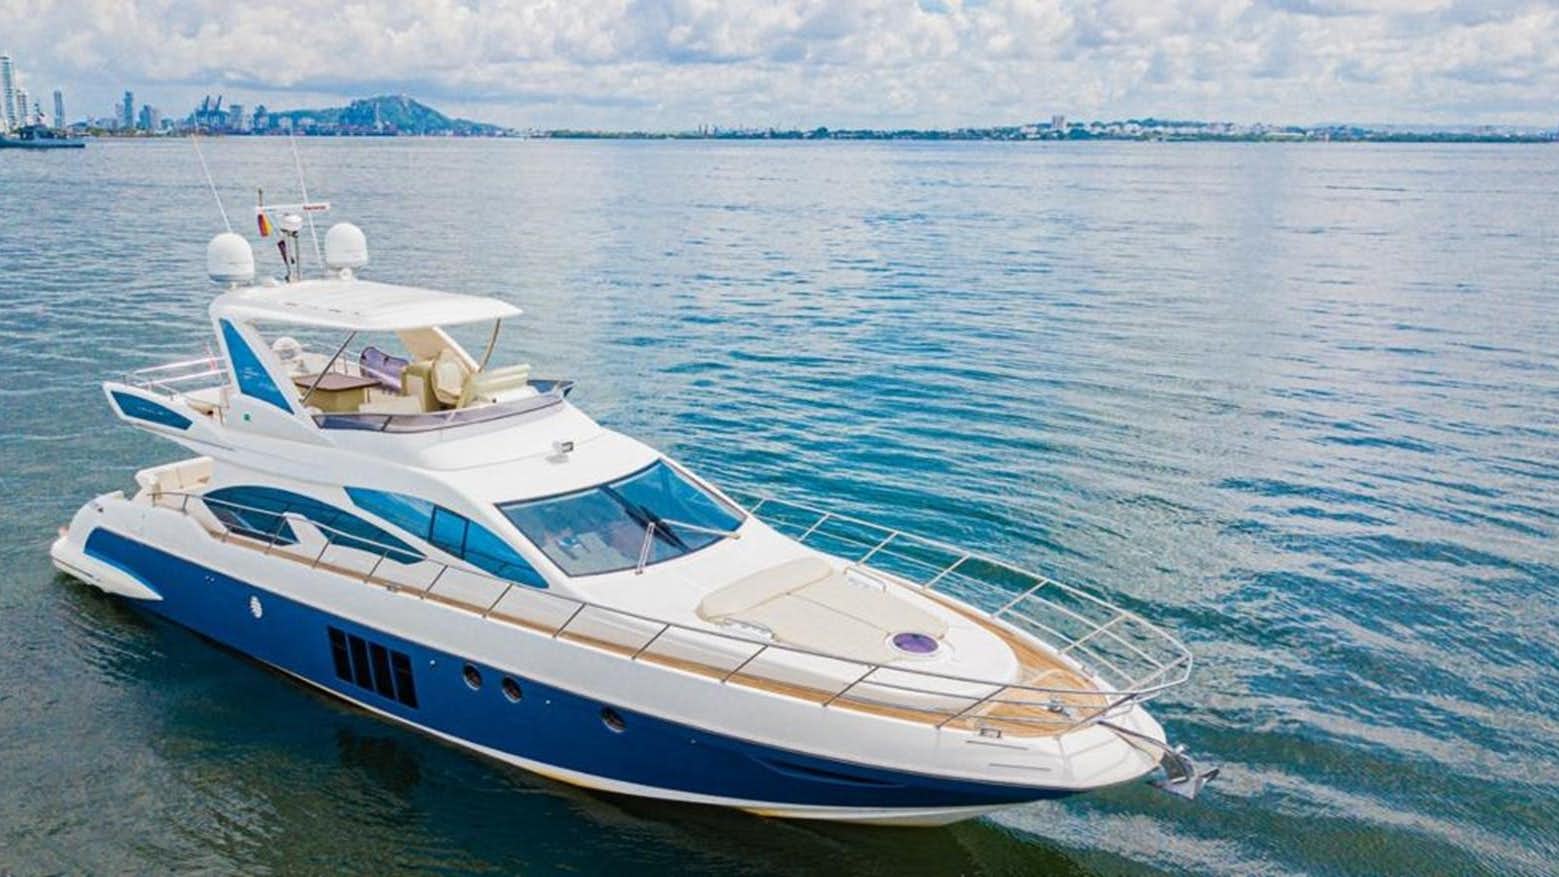 Copacetic
Yacht for Sale